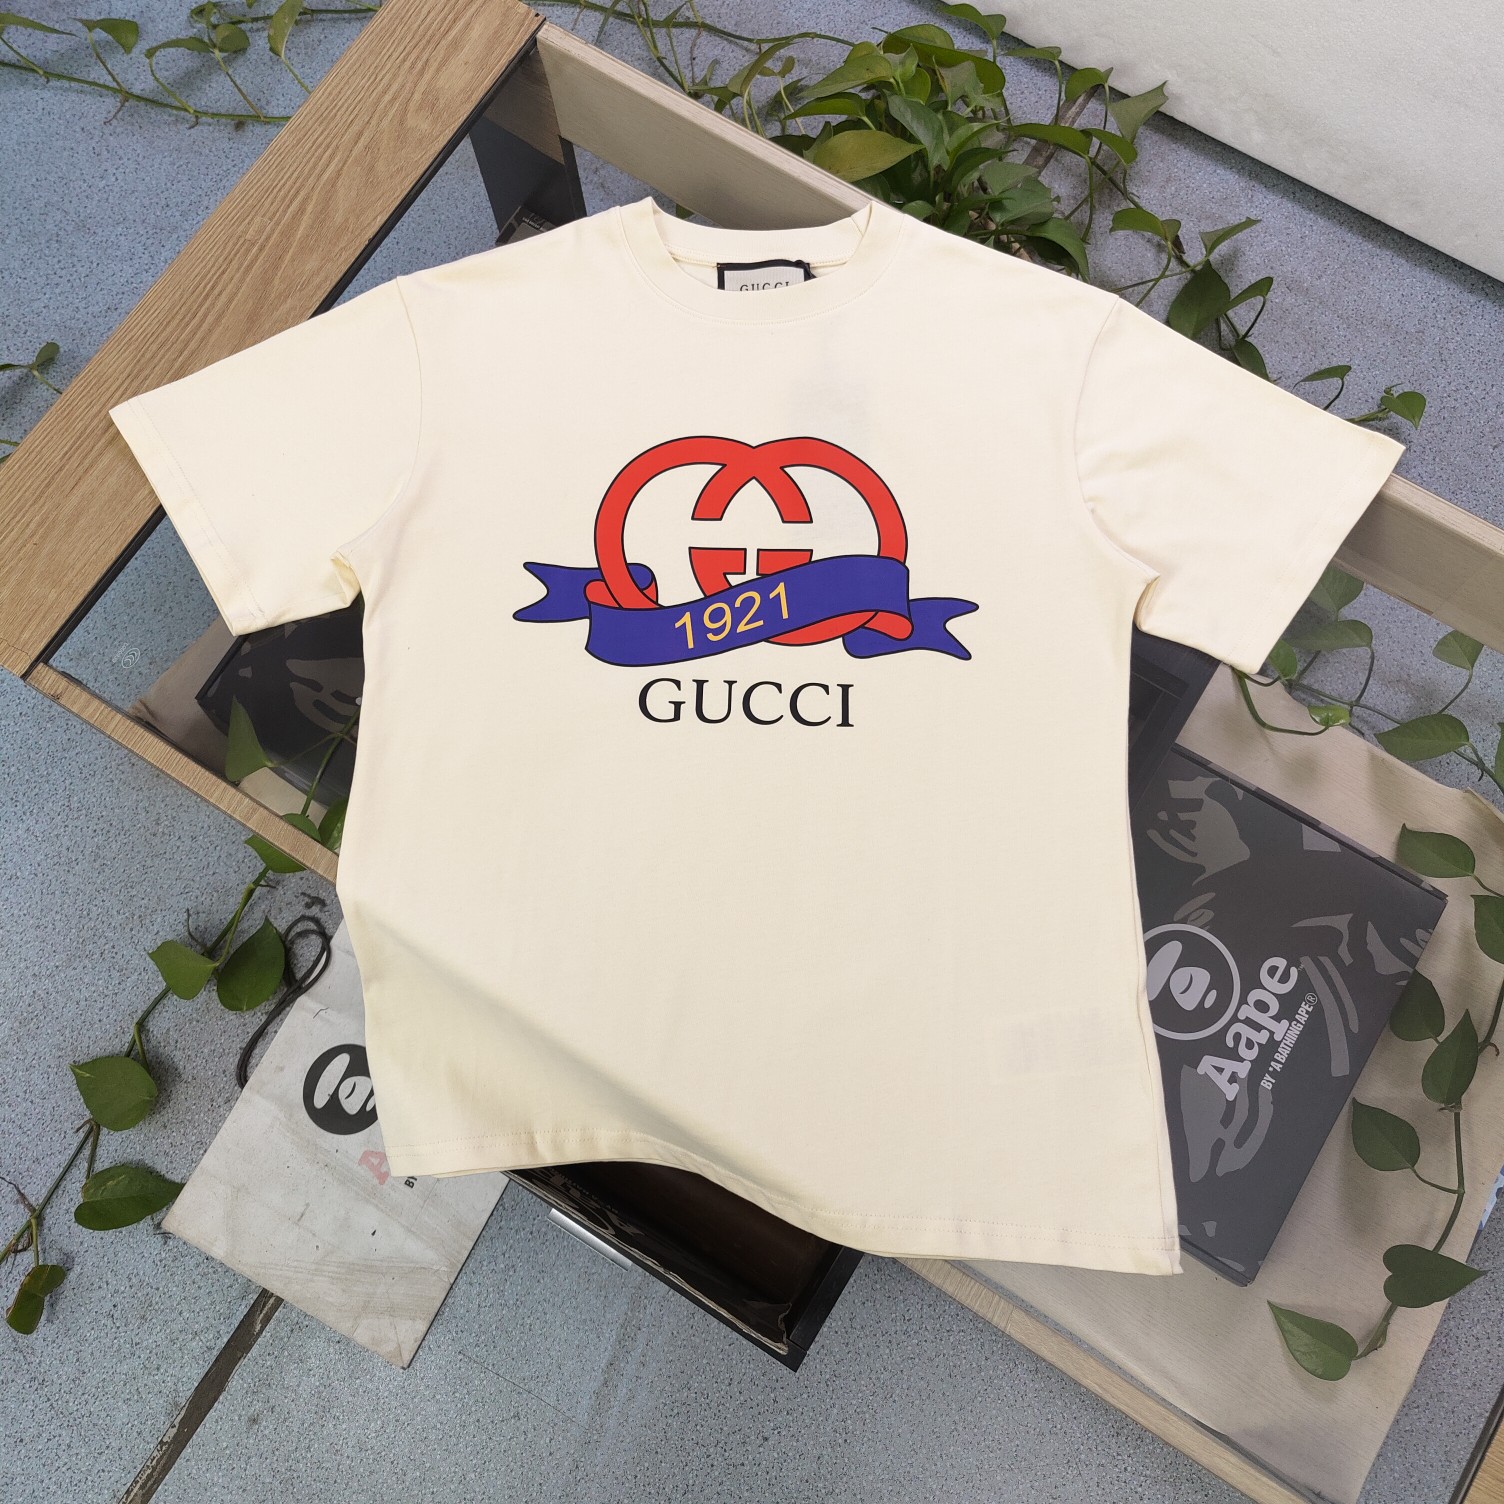 Gucci Clothing T-Shirt Apricot Color Black Printing Unisex Cotton Spring/Summer Collection Short Sleeve XD99153